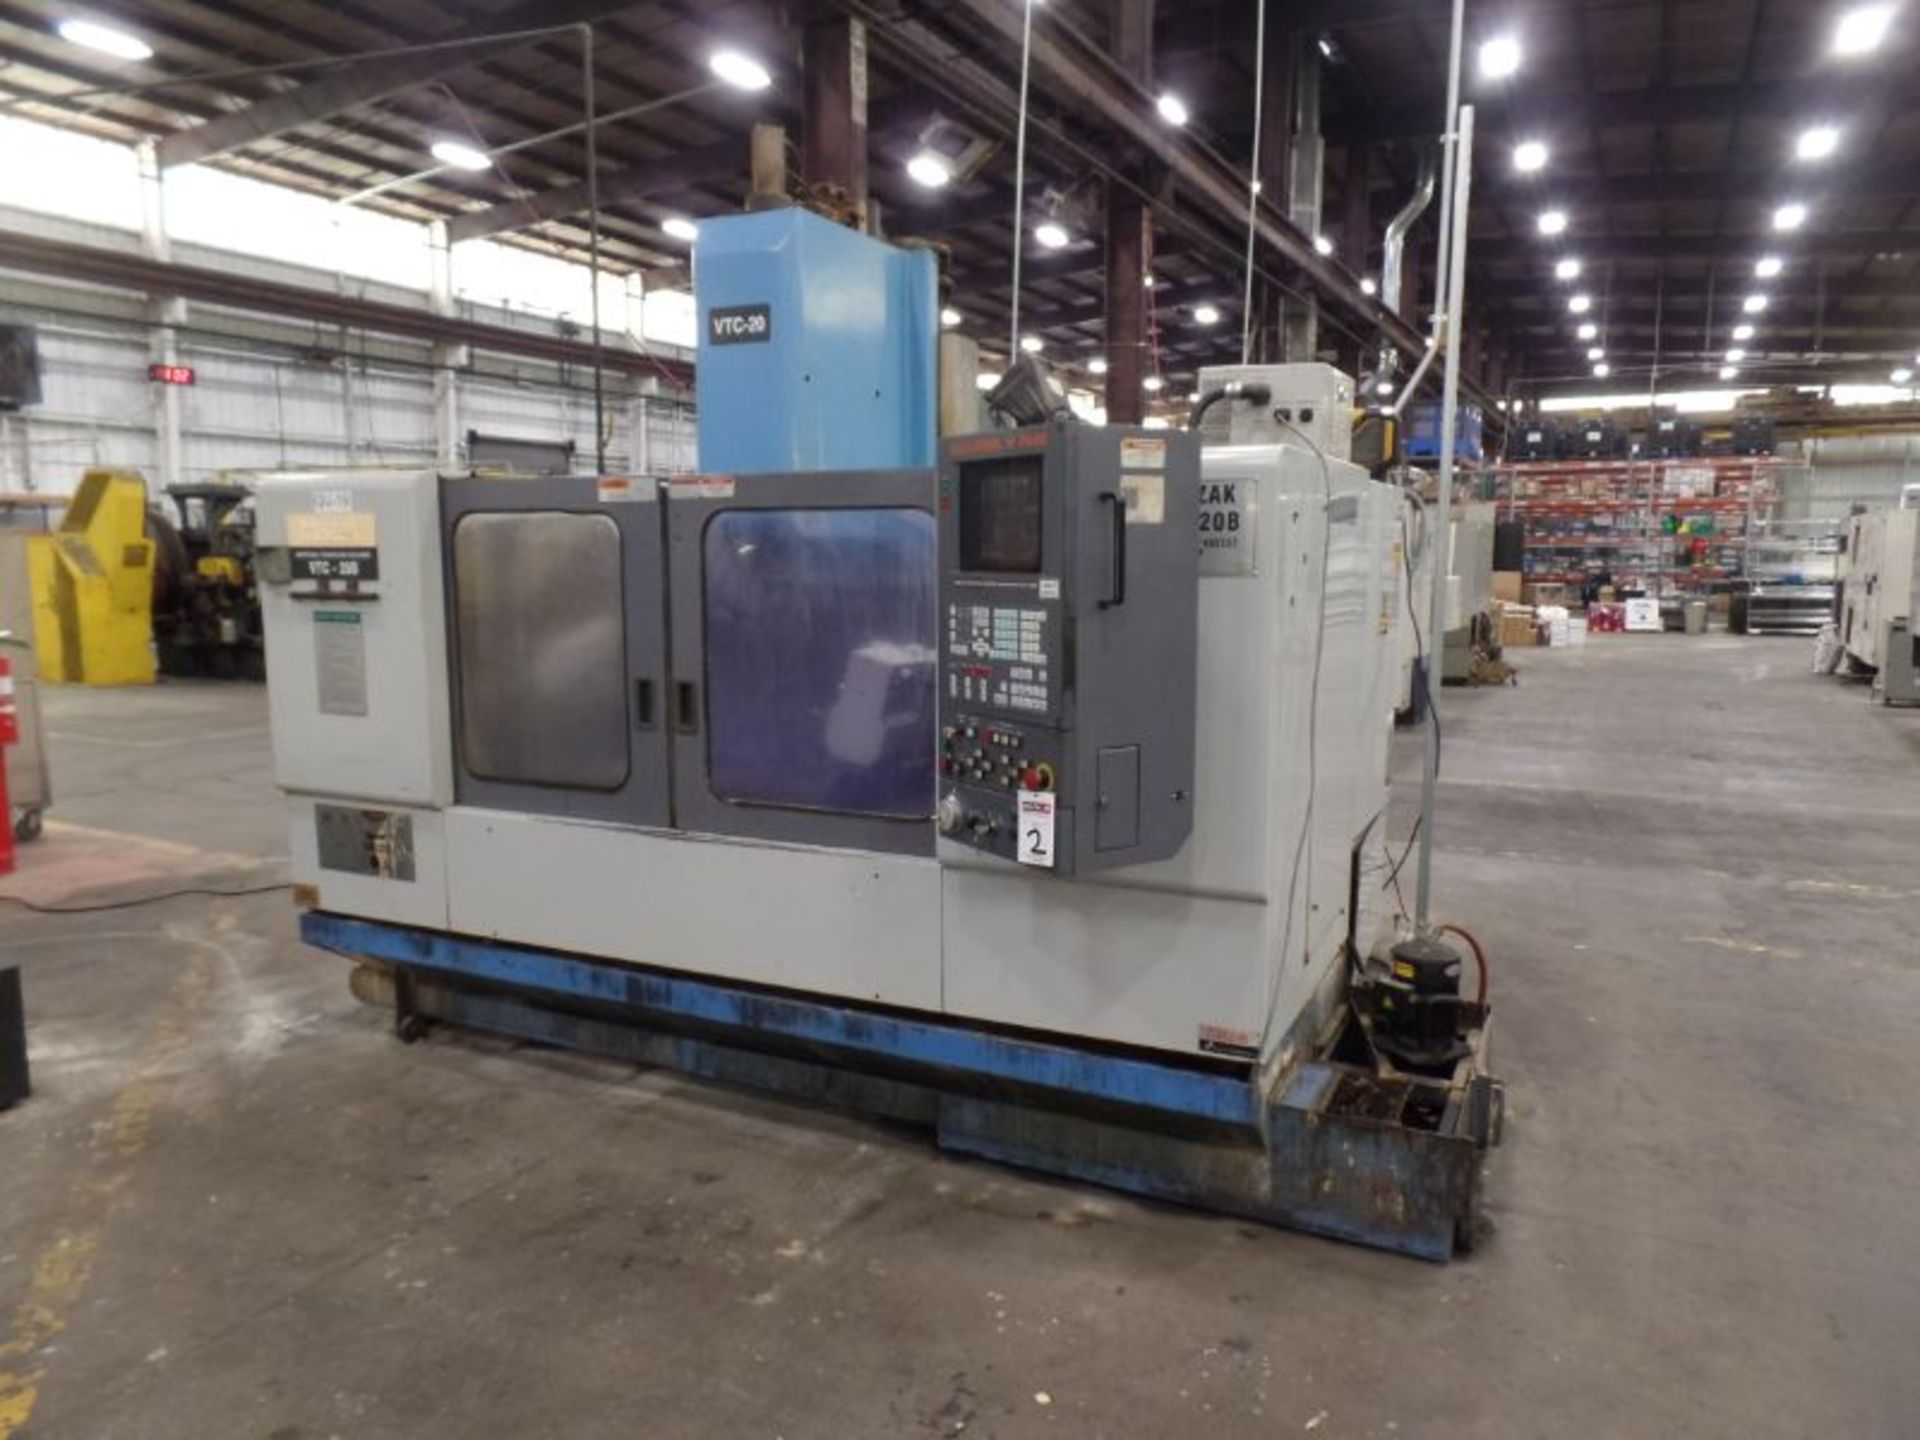 Mazak VTC20B, M-Plus Ctrl, 44”x 20”x 20” Travels, CT40, New1998 *Rotary Table Sold Separate* - Image 3 of 9